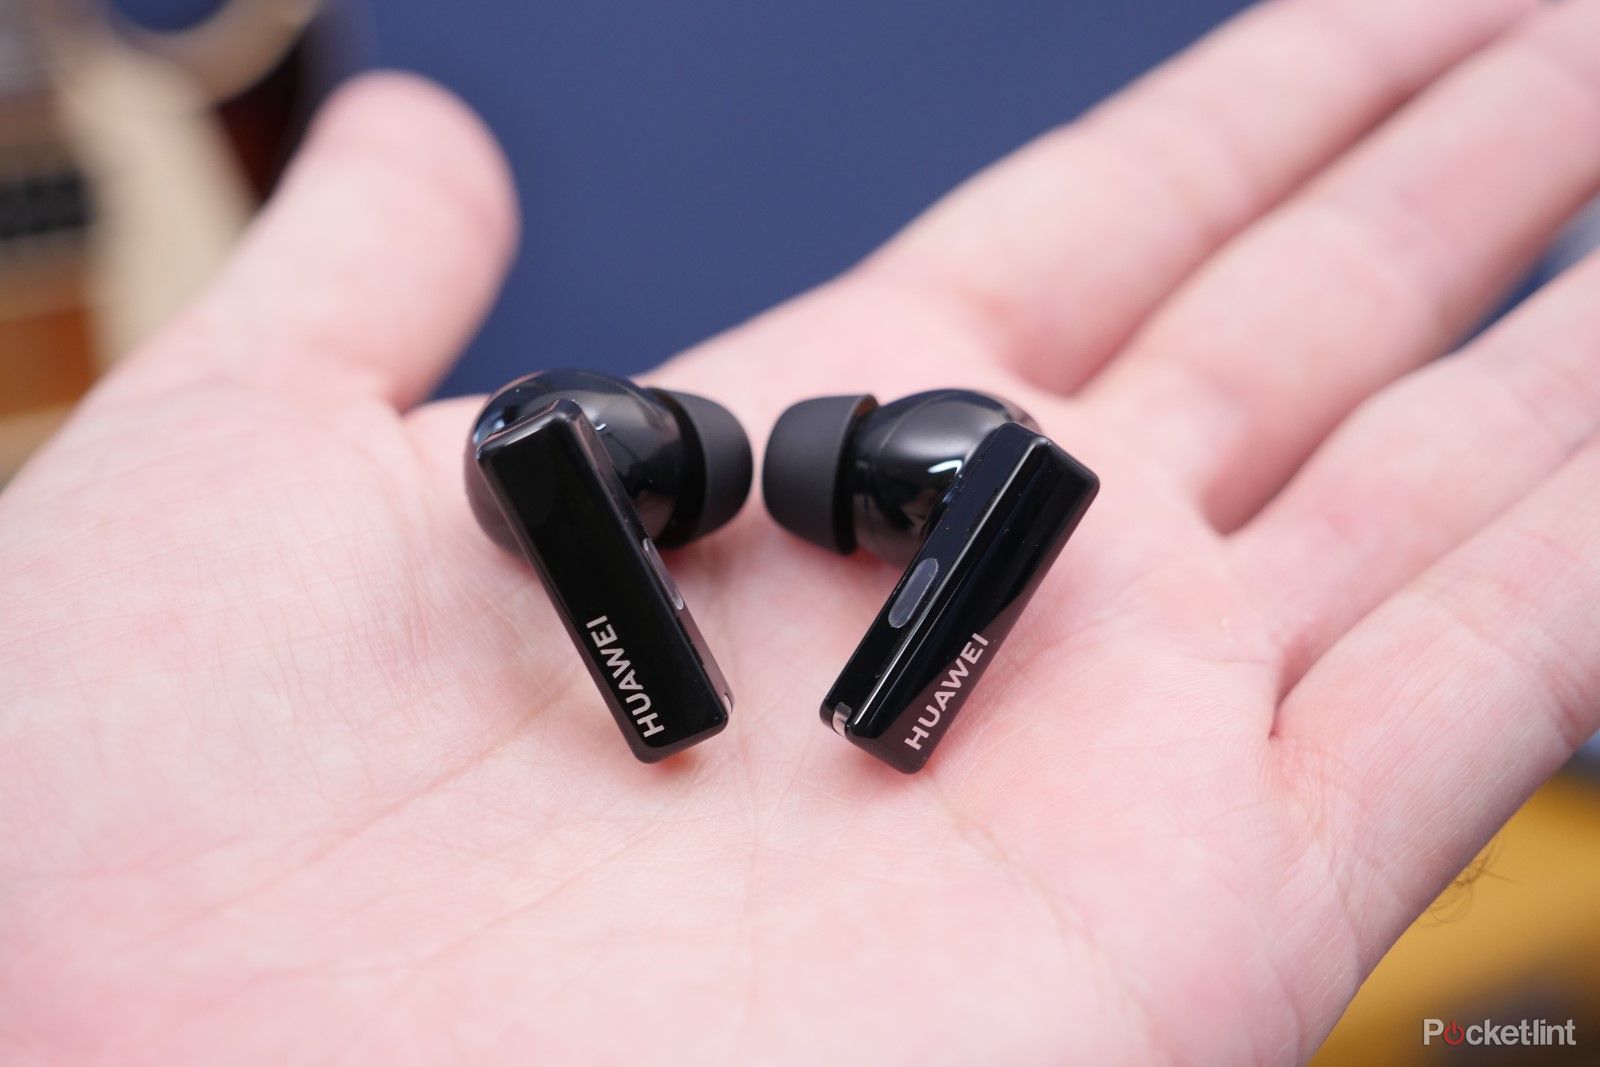 Huawei Freebuds Pro initial review: Convenient ANC true wireless earbuds photo 6